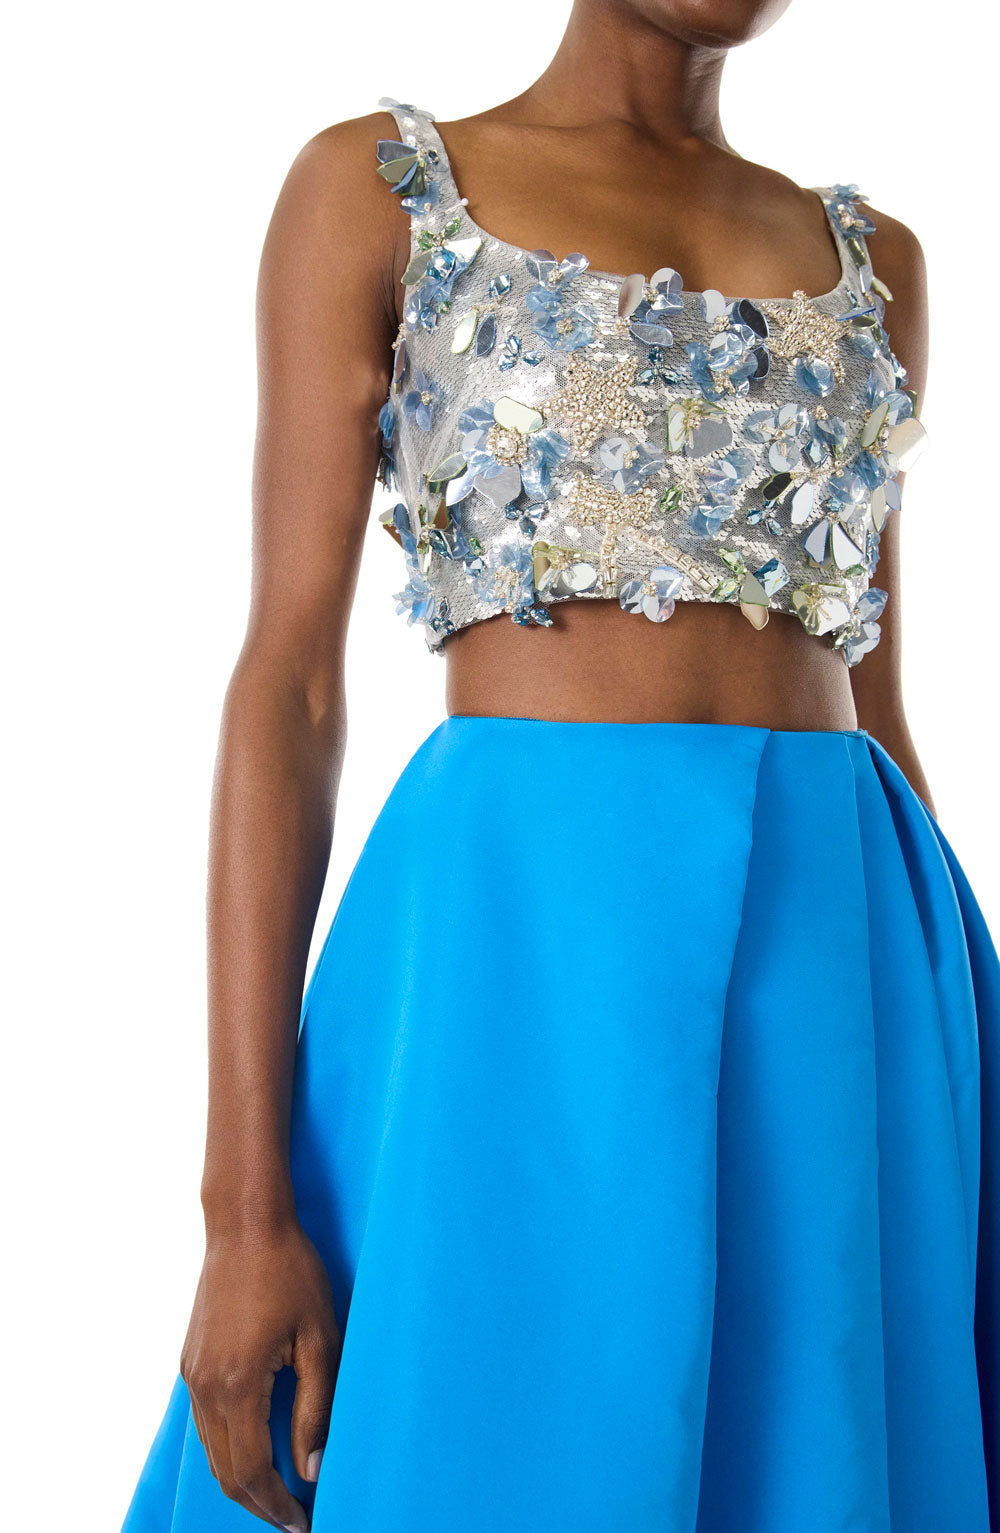 Monique Lhuillier silver embroidered crop top shown with the cobalt blue silk faille skirt.